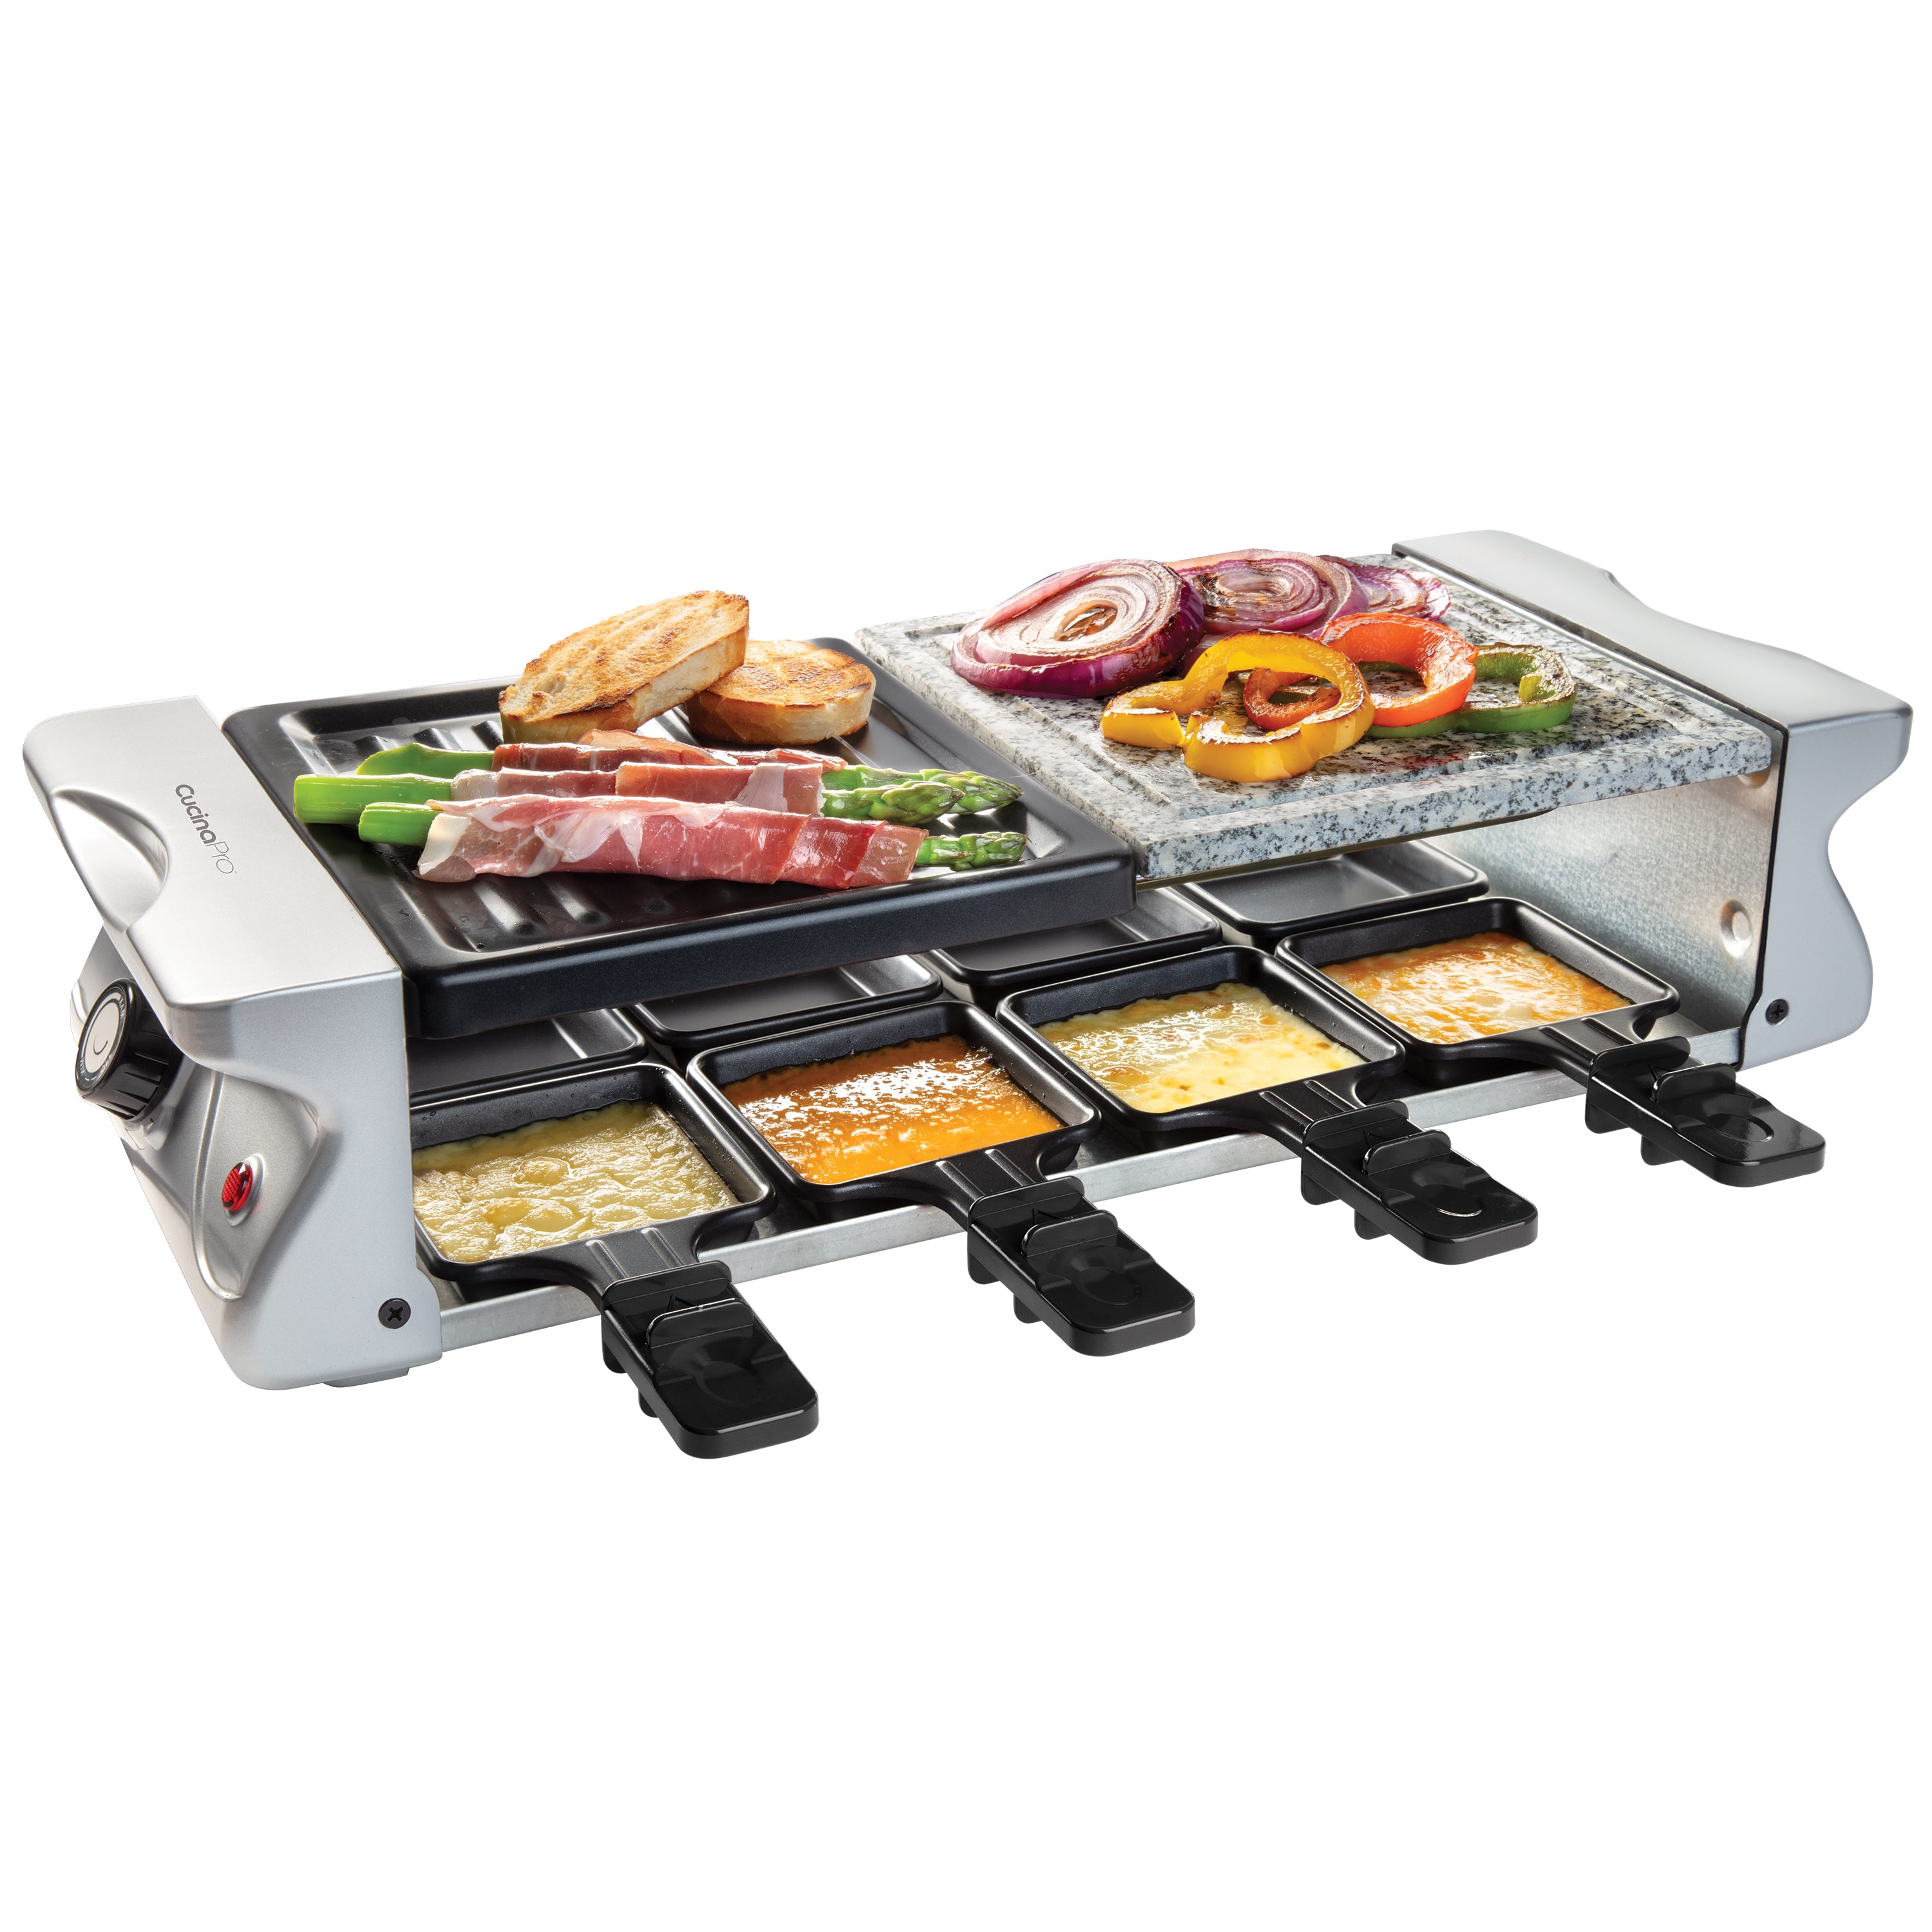 CucinaPro Electric w Plate Cheese Grilling Nonstick Raclette